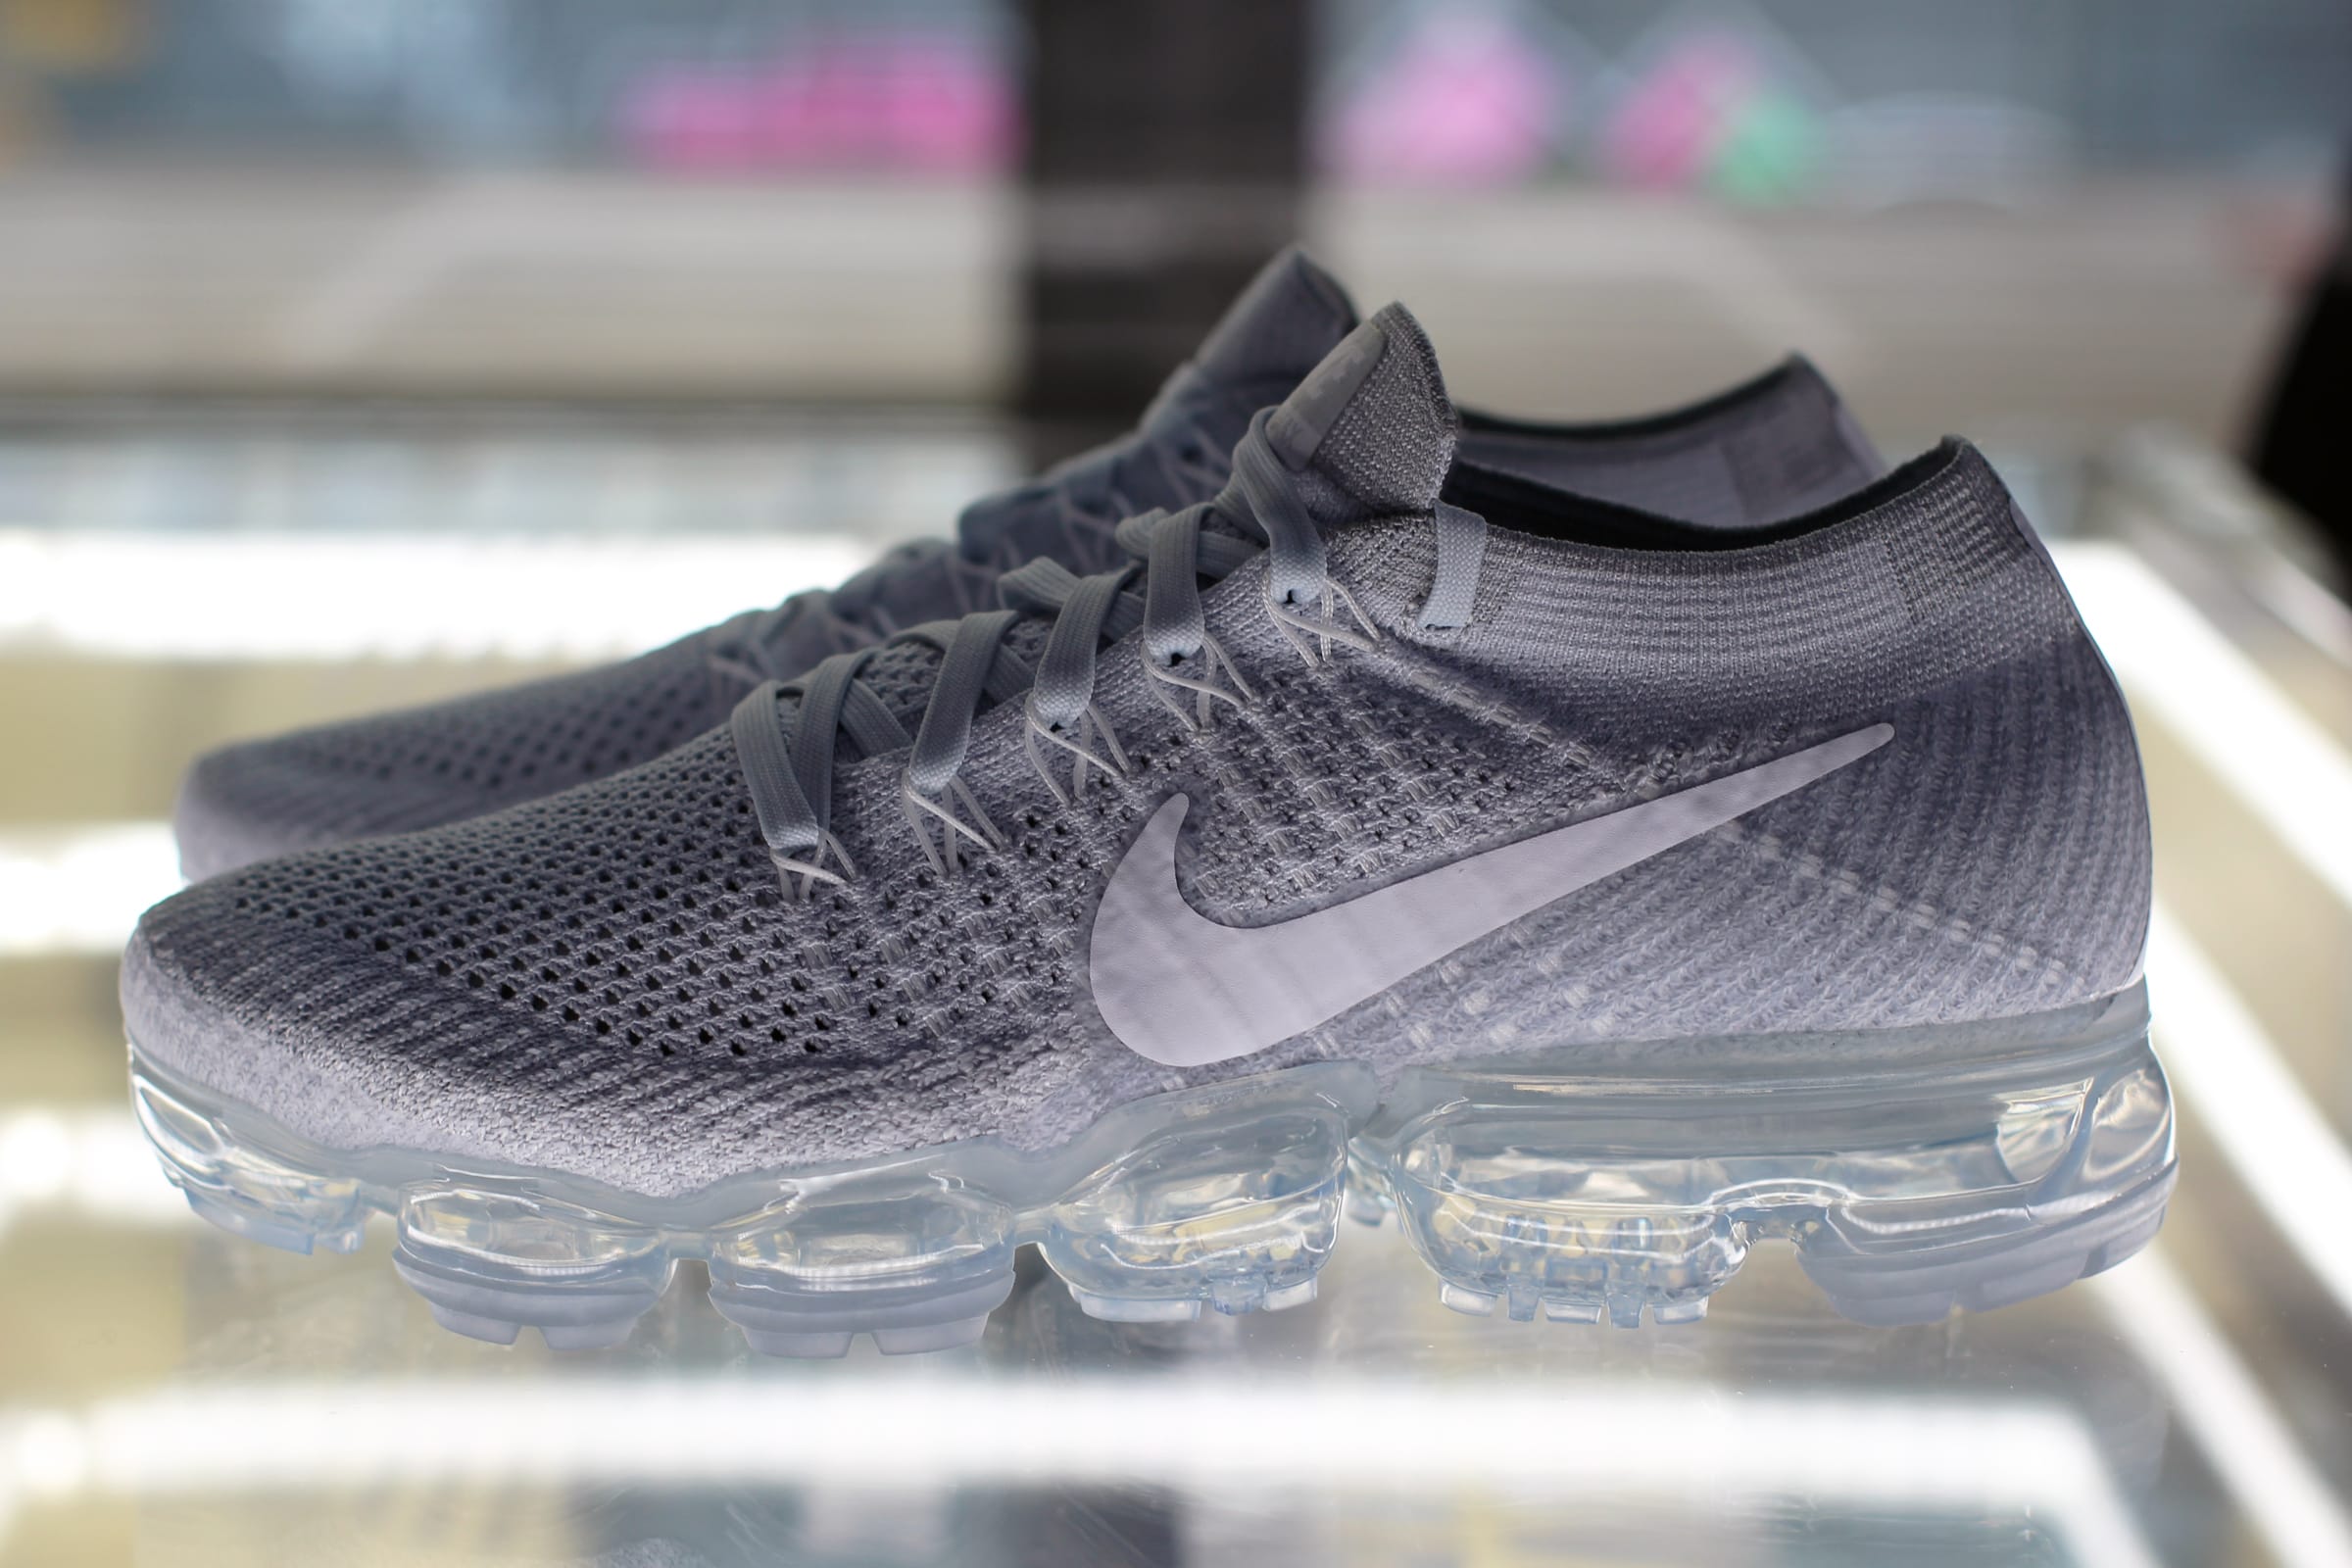 NIKEiD Options for New Air VaporMax 